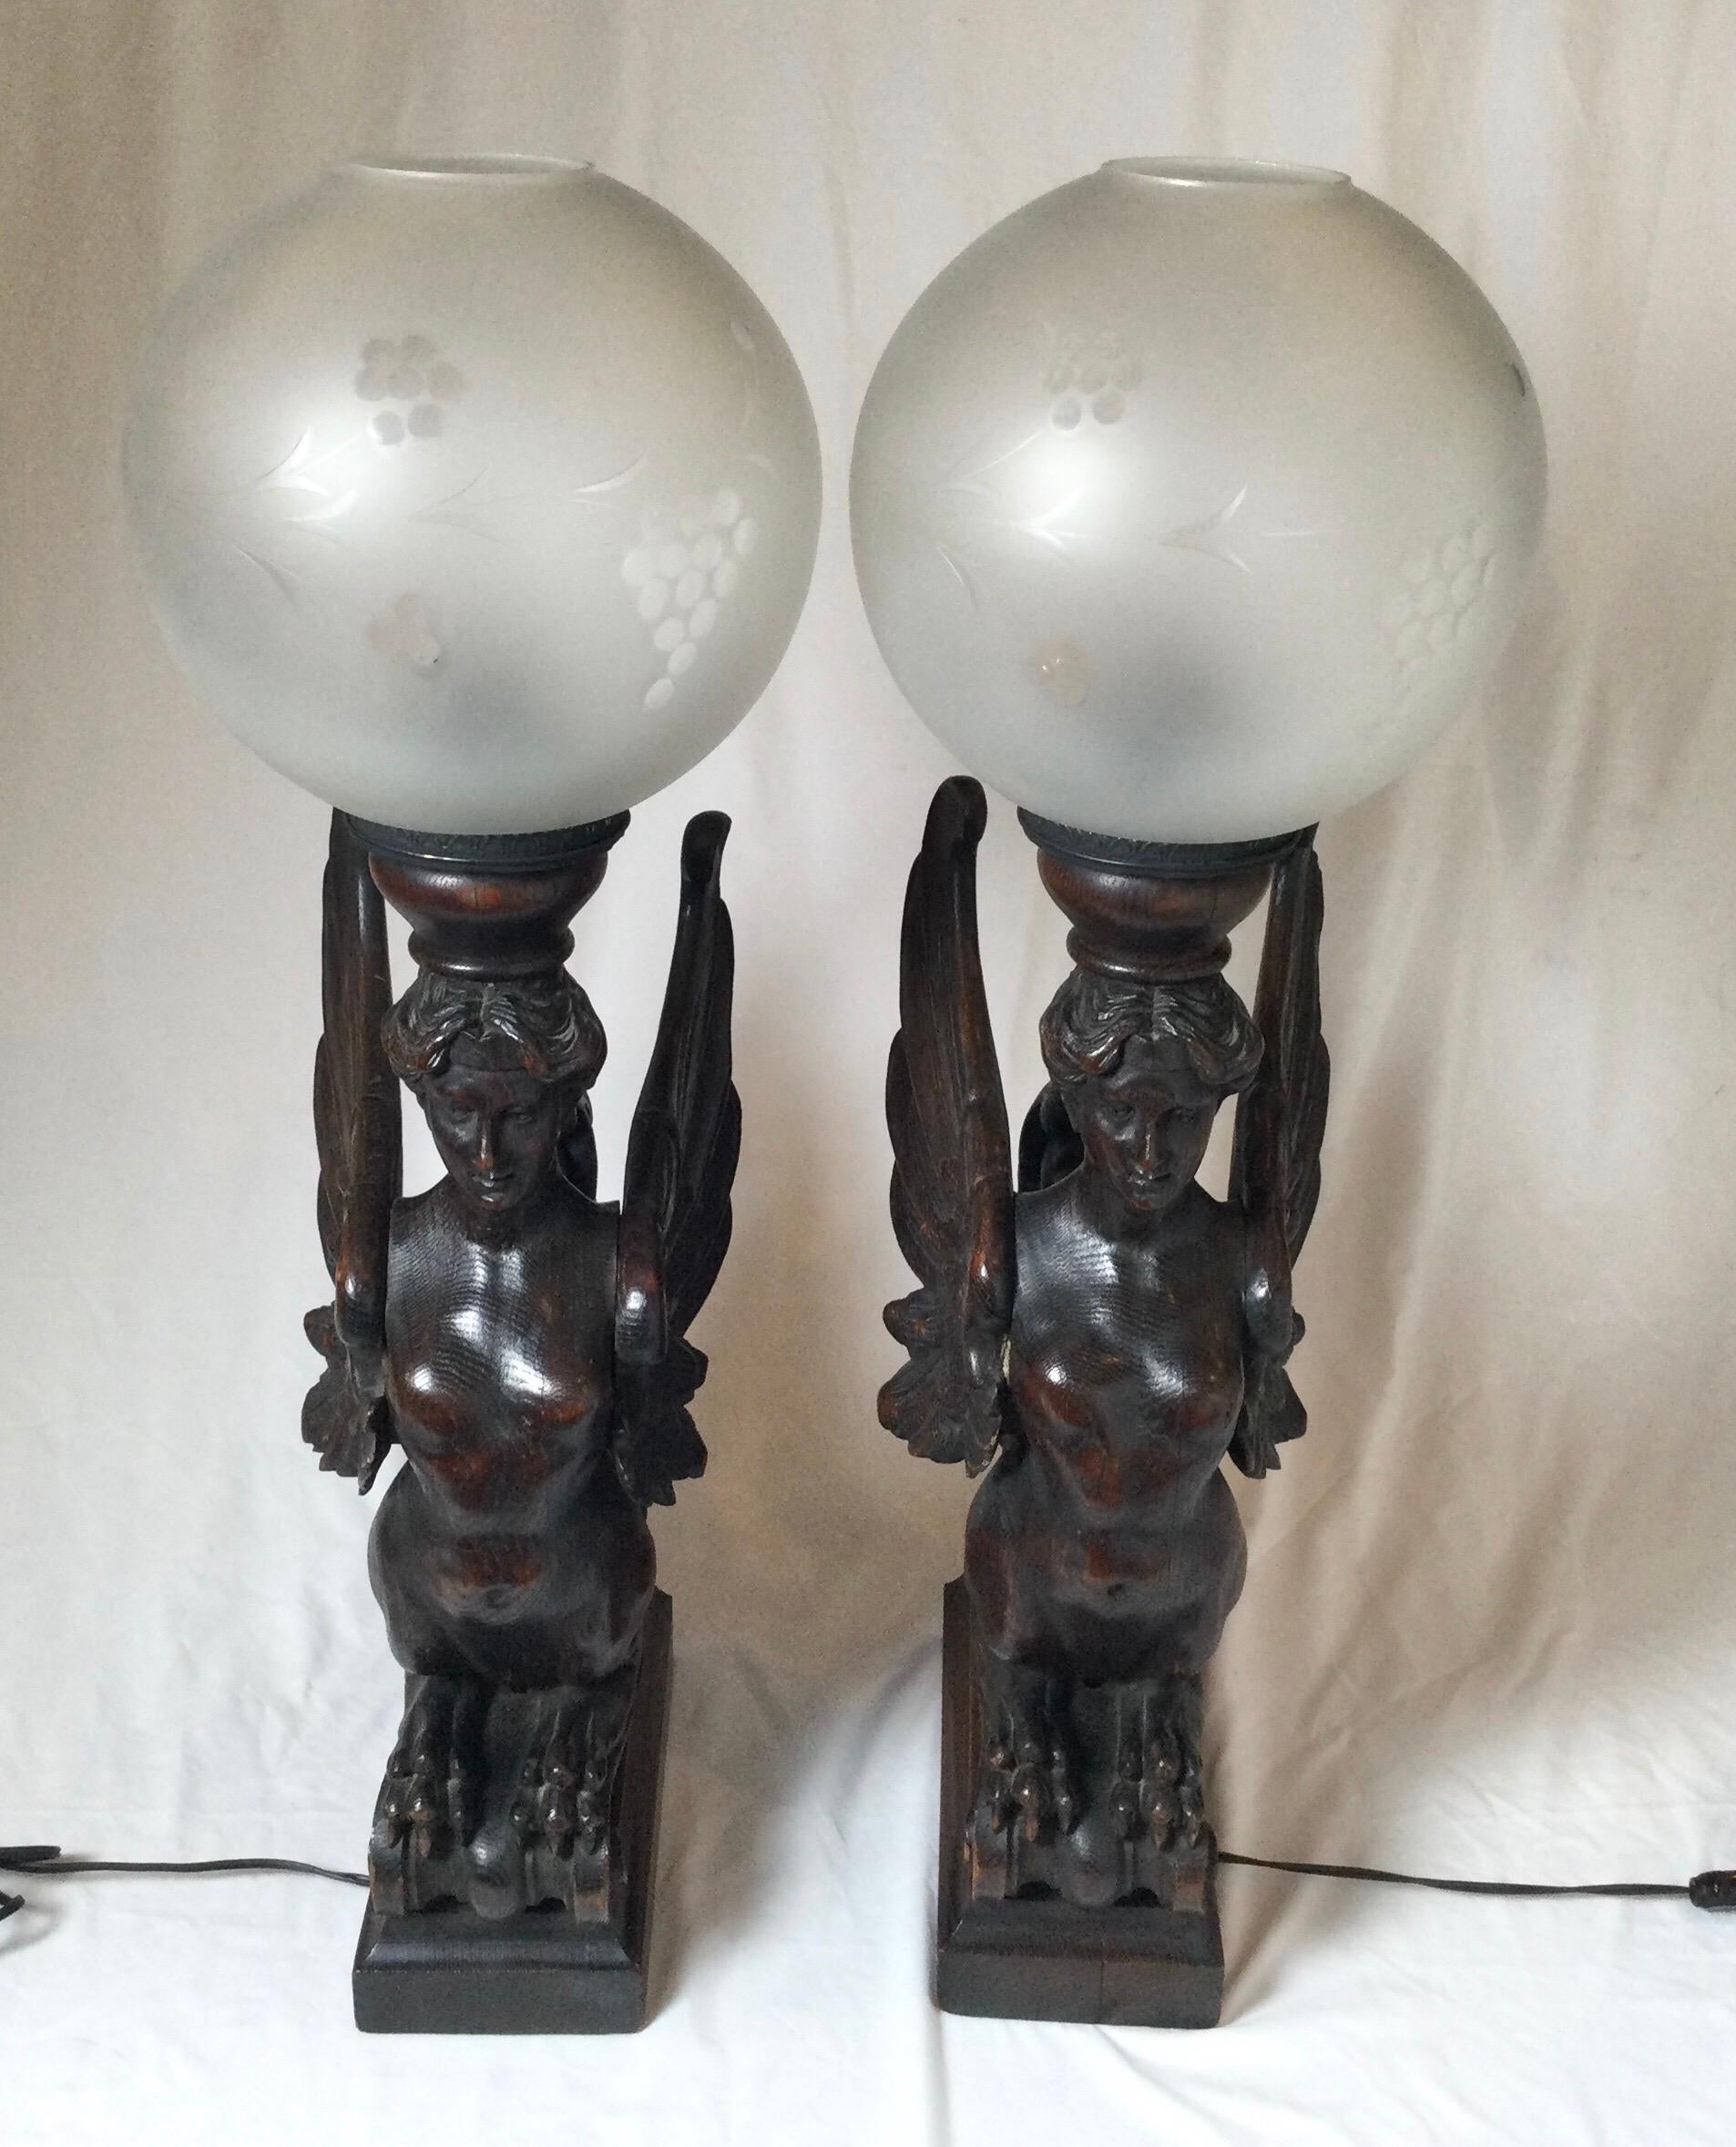 Circa 1880 pair of hand carved wood winged caryatids-griffins, now as table lamps
Architectural carvings from the Victorian age that have been electrified. 
Great for those that are looking for something unusual.
Dimensions: 13